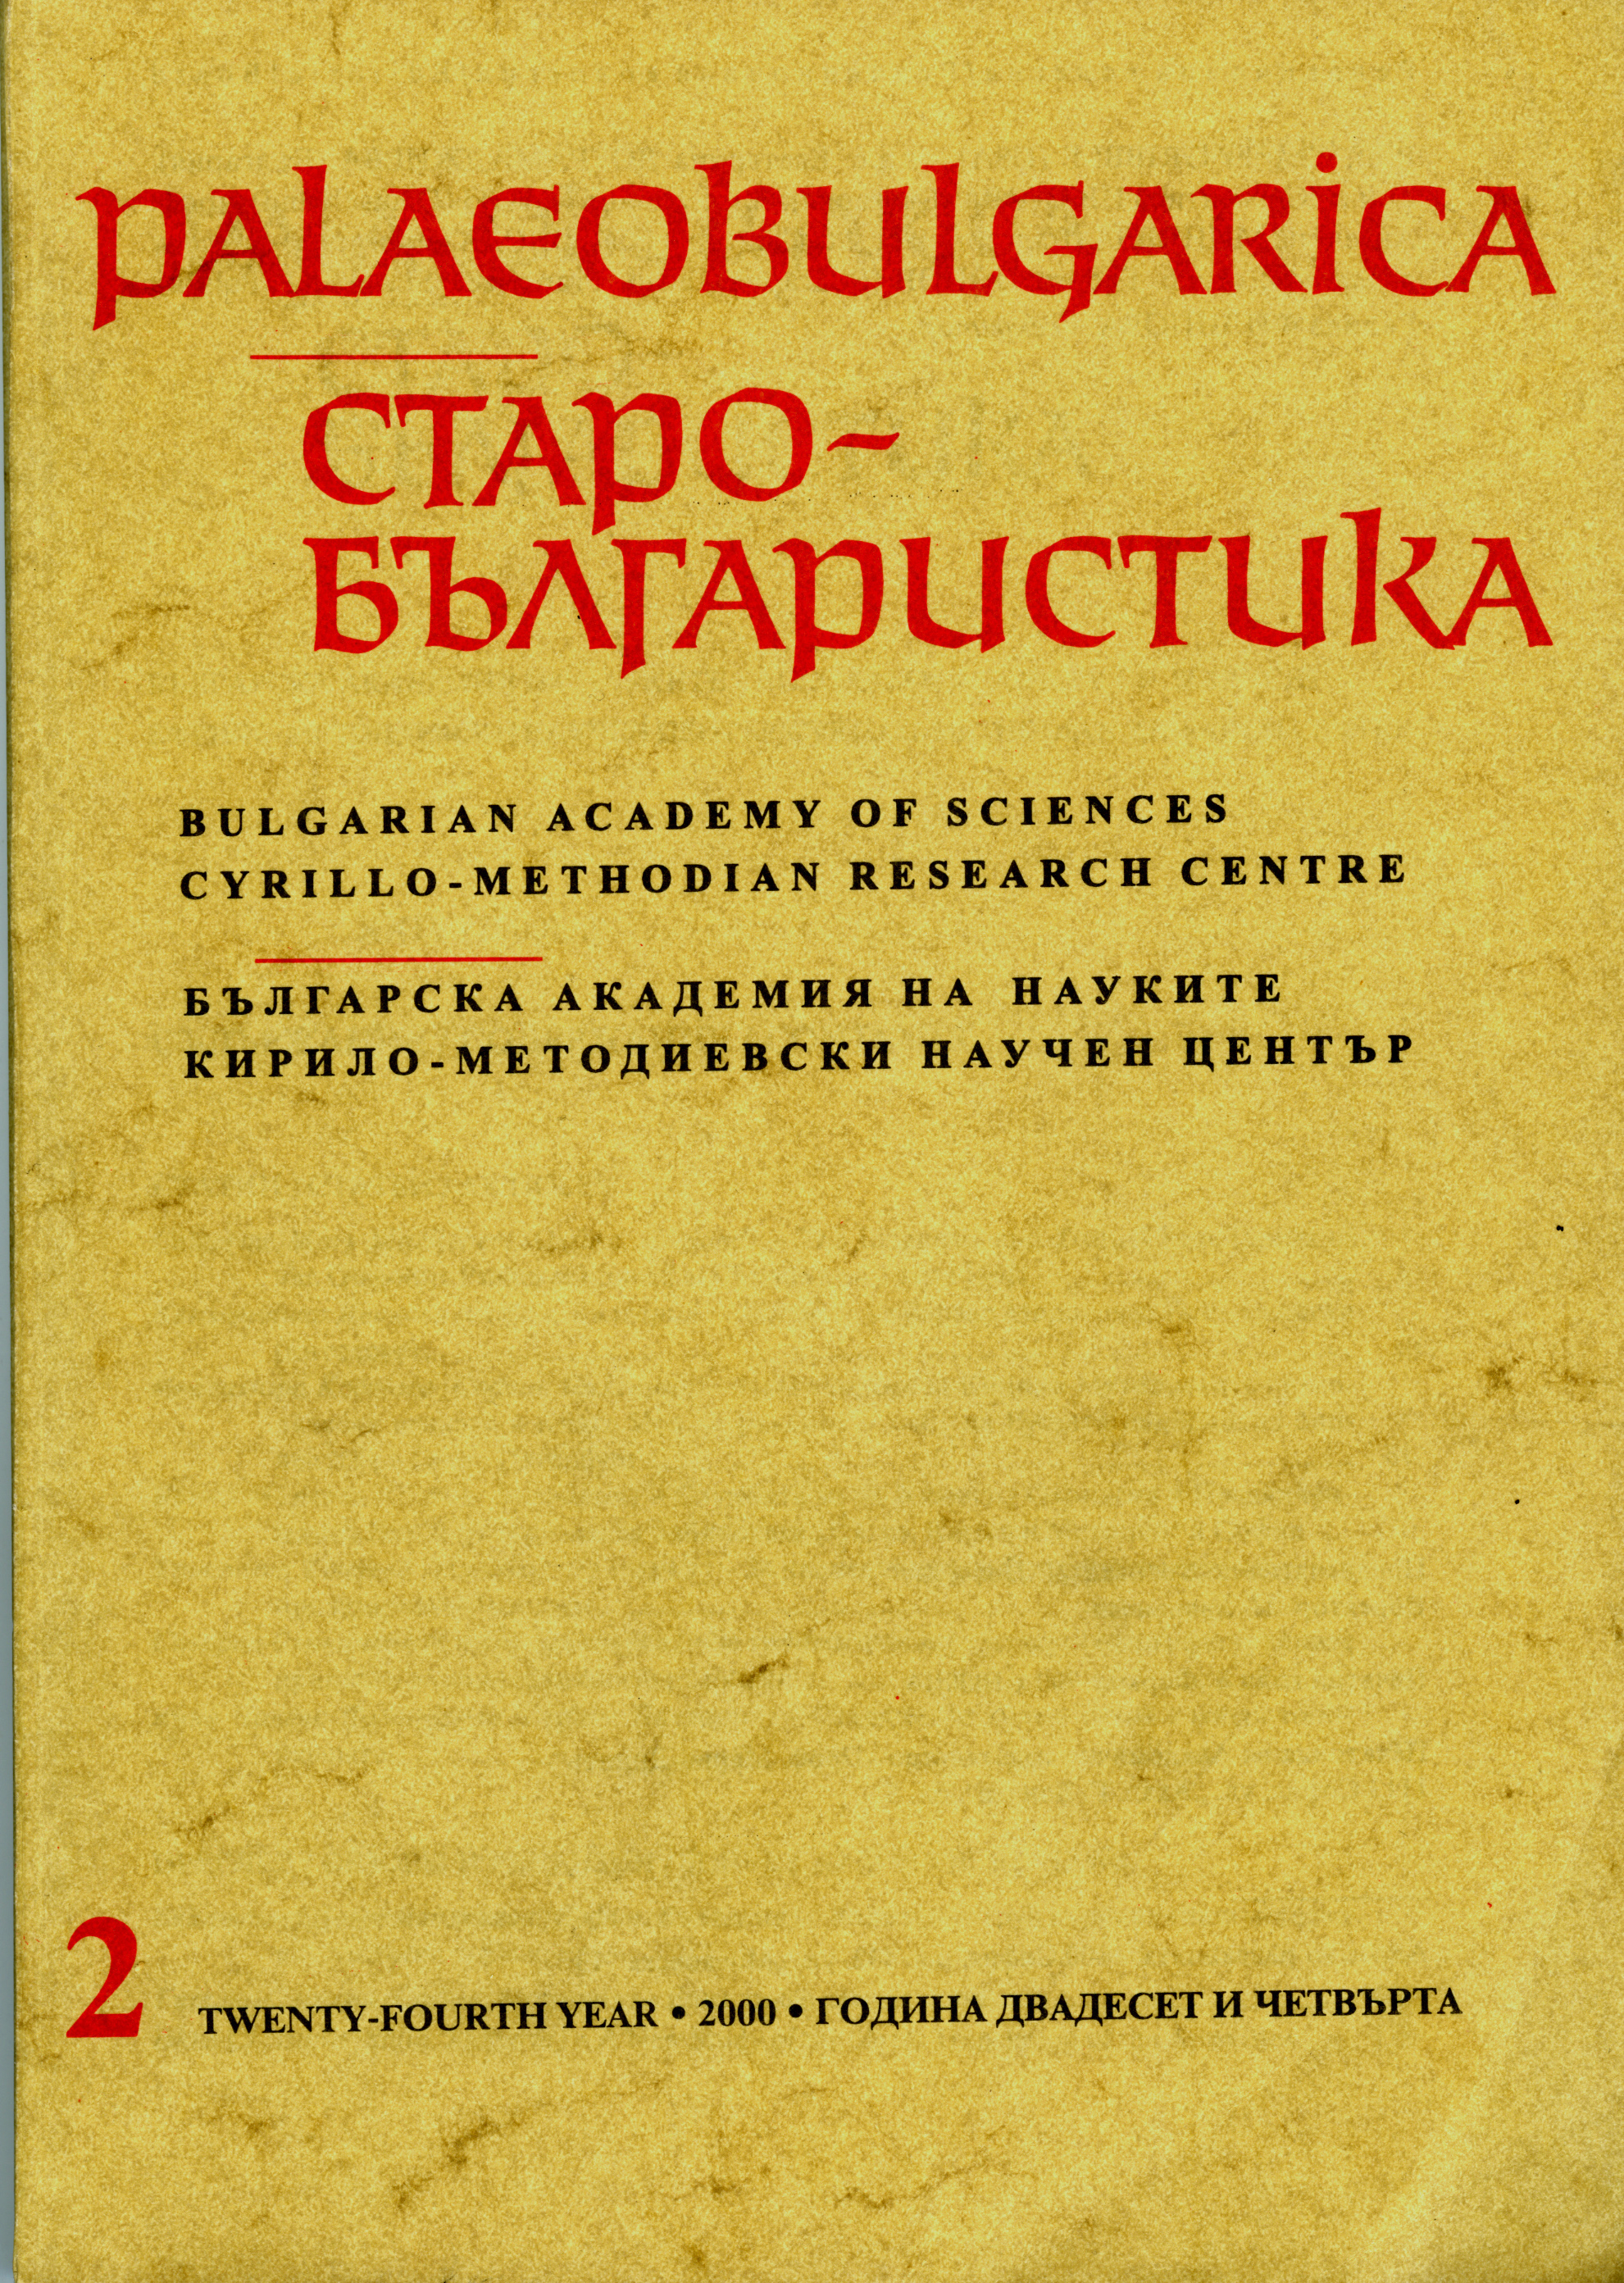 The Service of St. Clement of Ohrid in the Festive Menaion No 122 at the “Ss. Cyril and Methodius” National Library in Sofia Cover Image